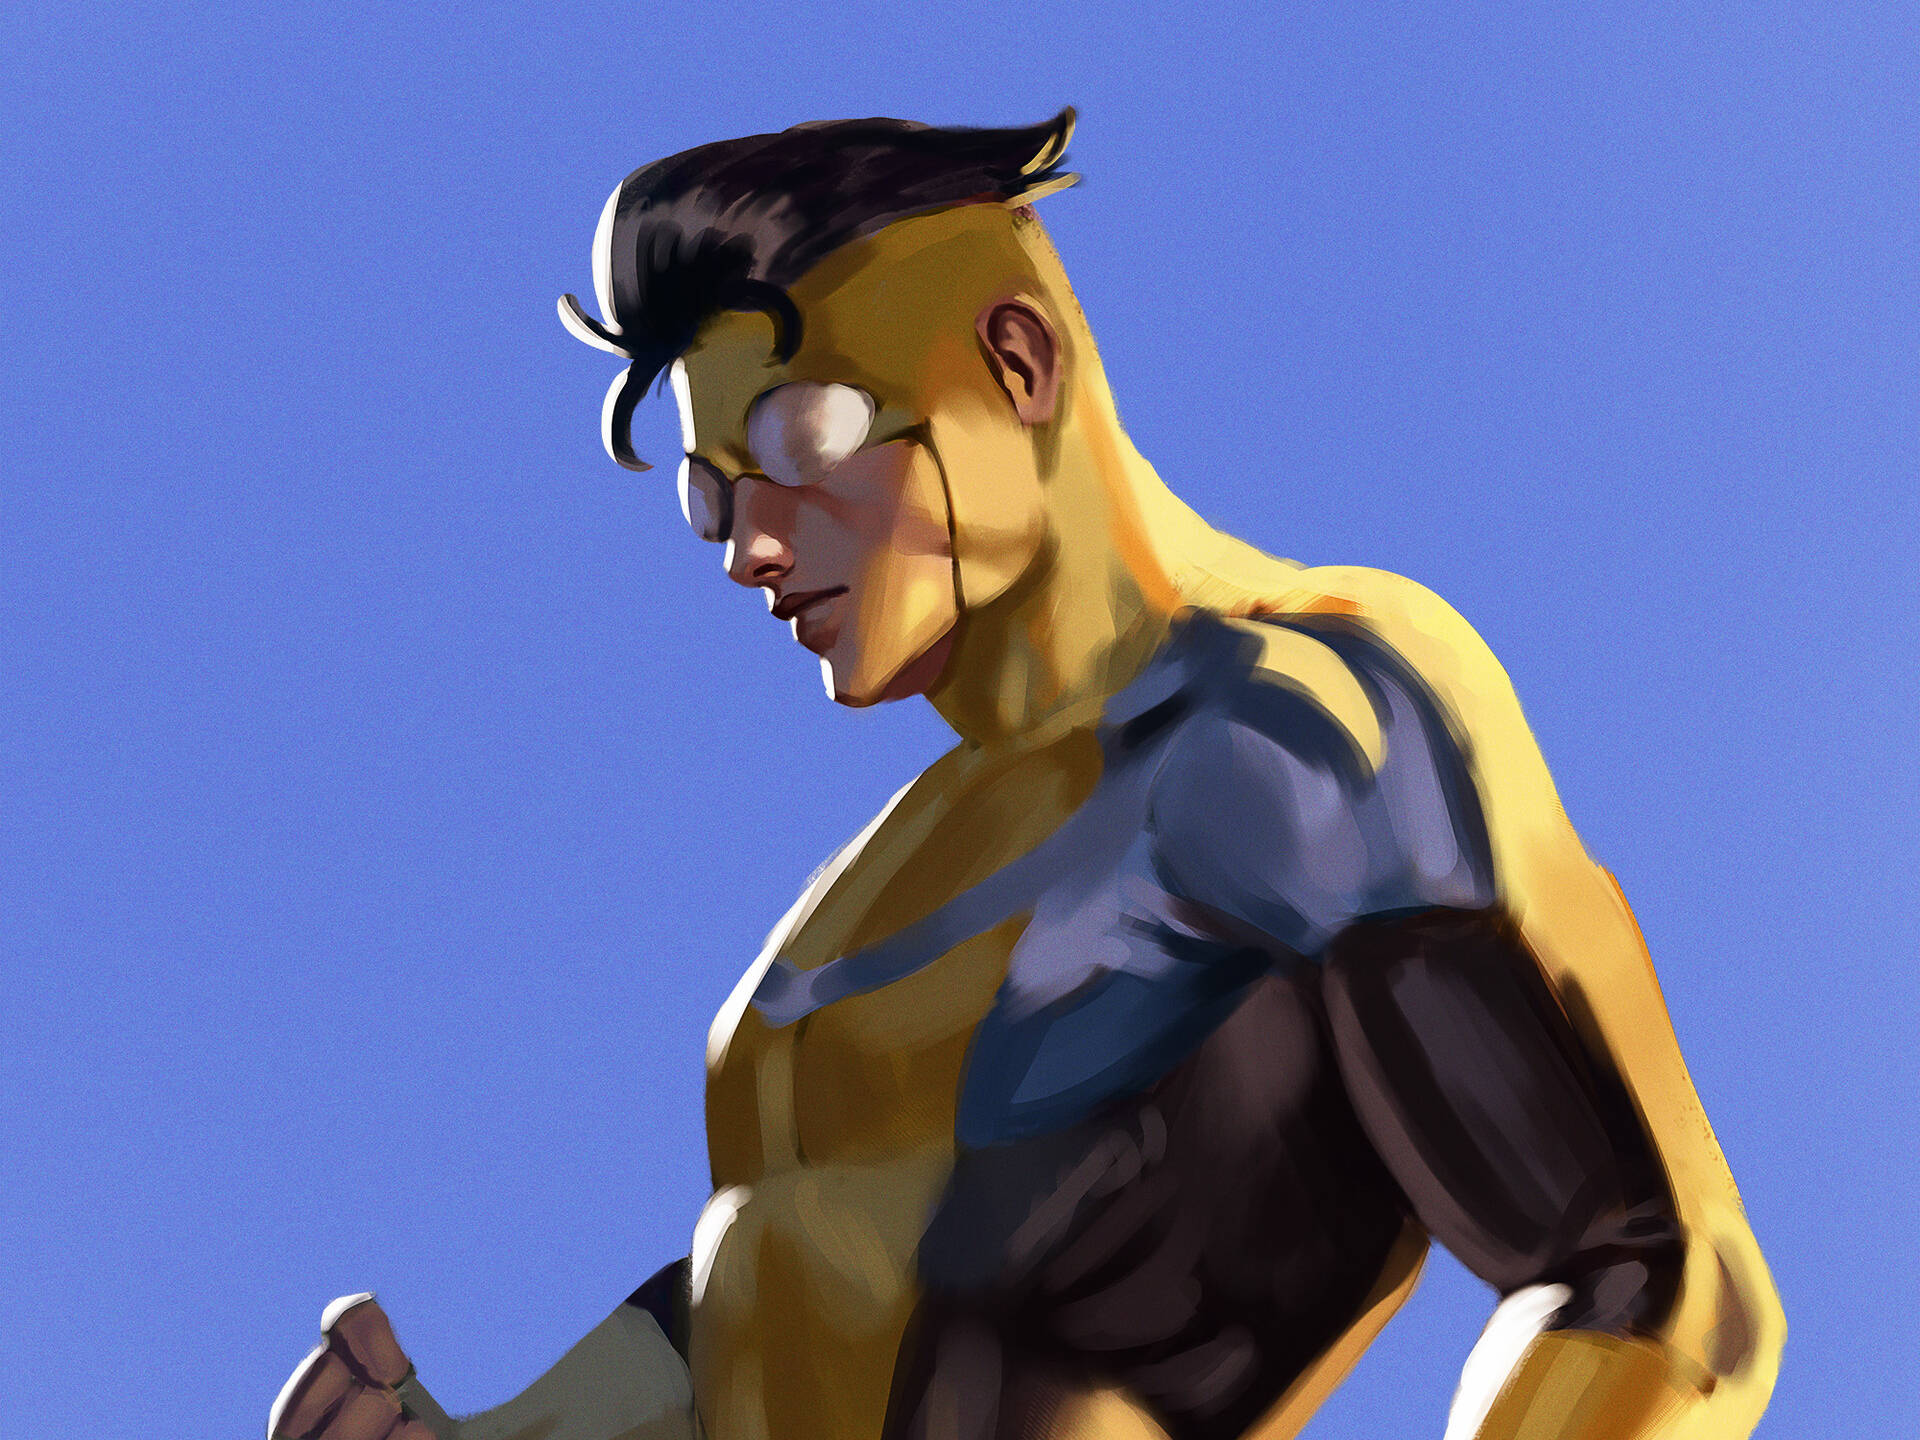 1920X1440 Invincible Wallpaper and Background